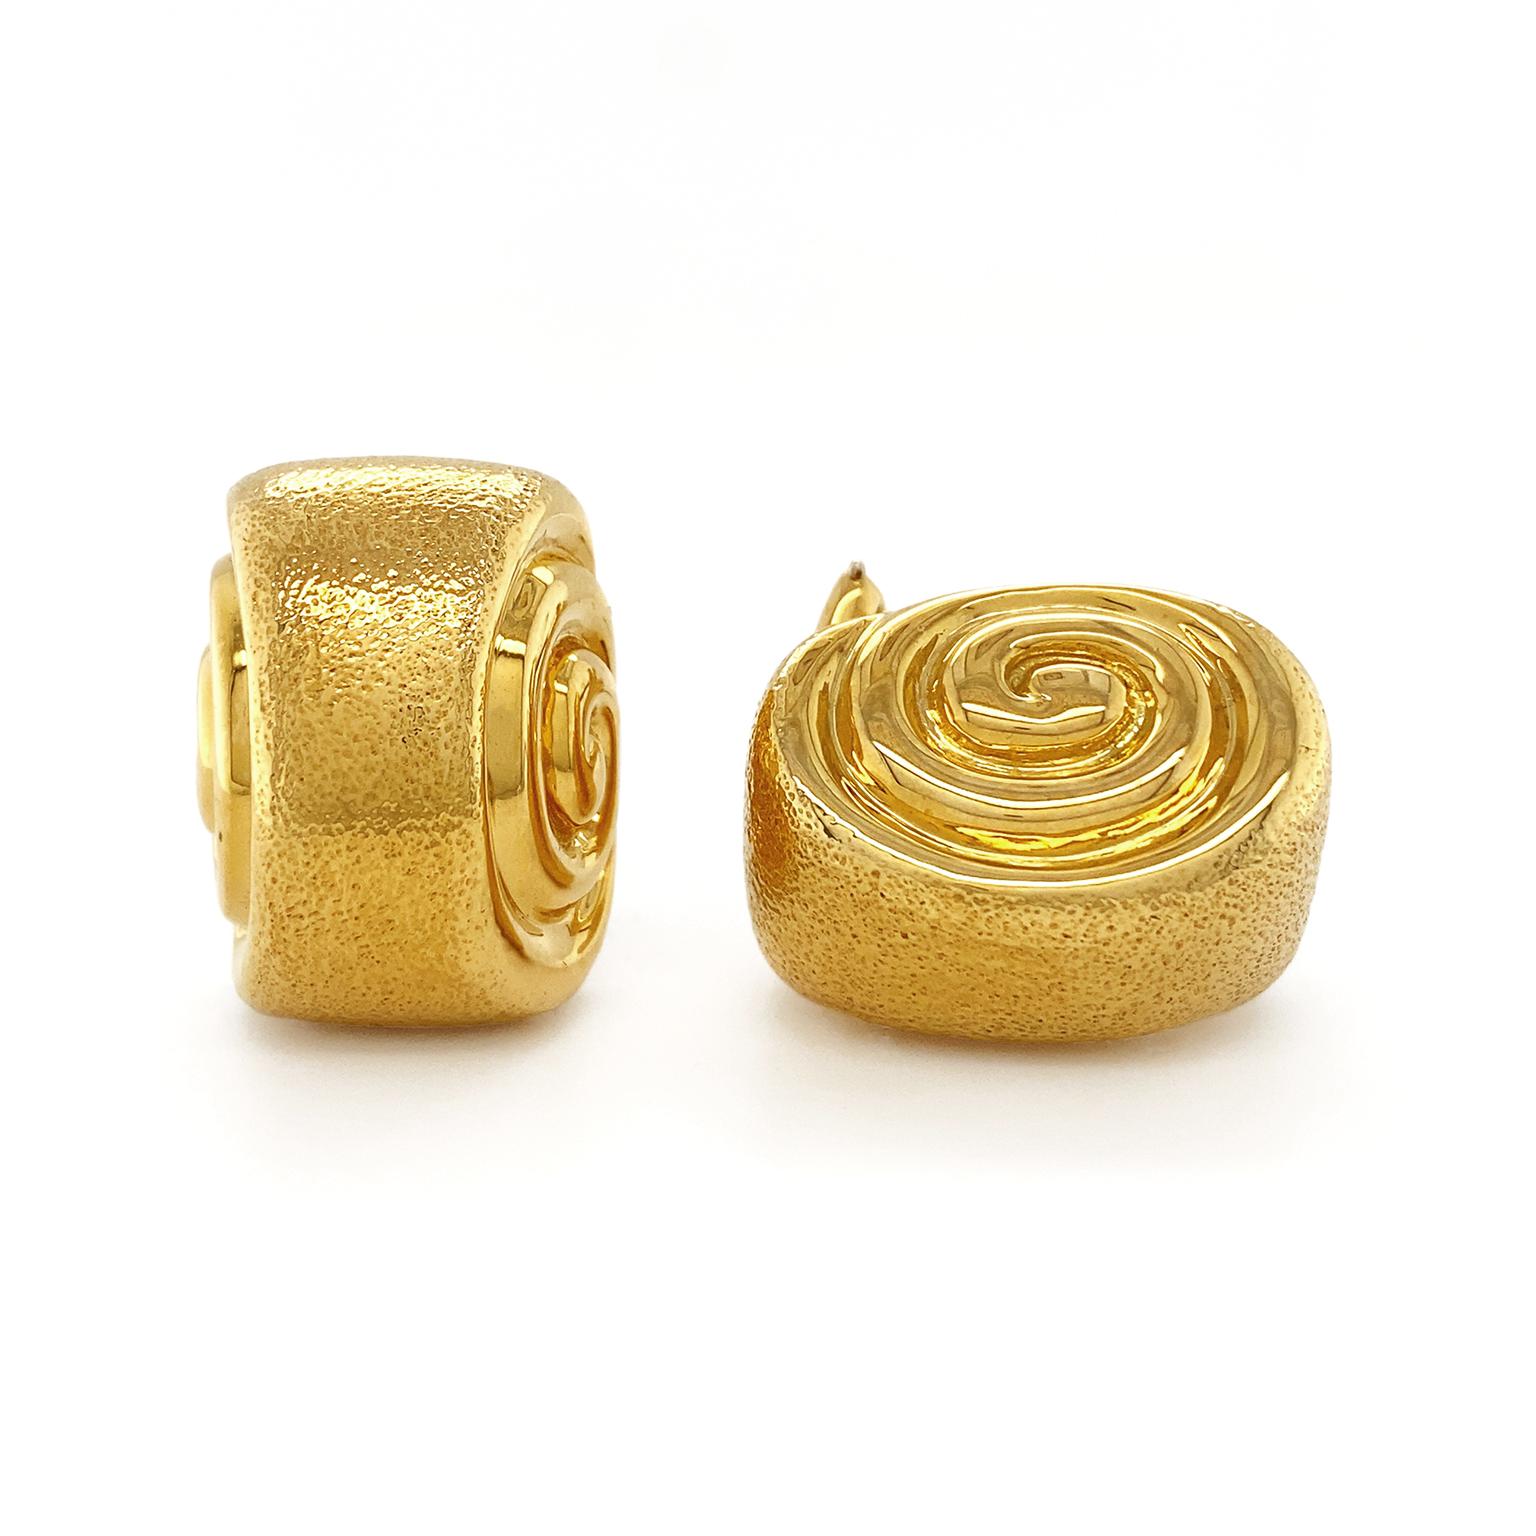 Light reflects in many ways from these earrings. The body is made of 18k yellow gold curled tight. Down the center are many tiny indents, creating a softer sheen. On either side is a tight spiral of smooth gold. Light forms sharp lines, some aimed